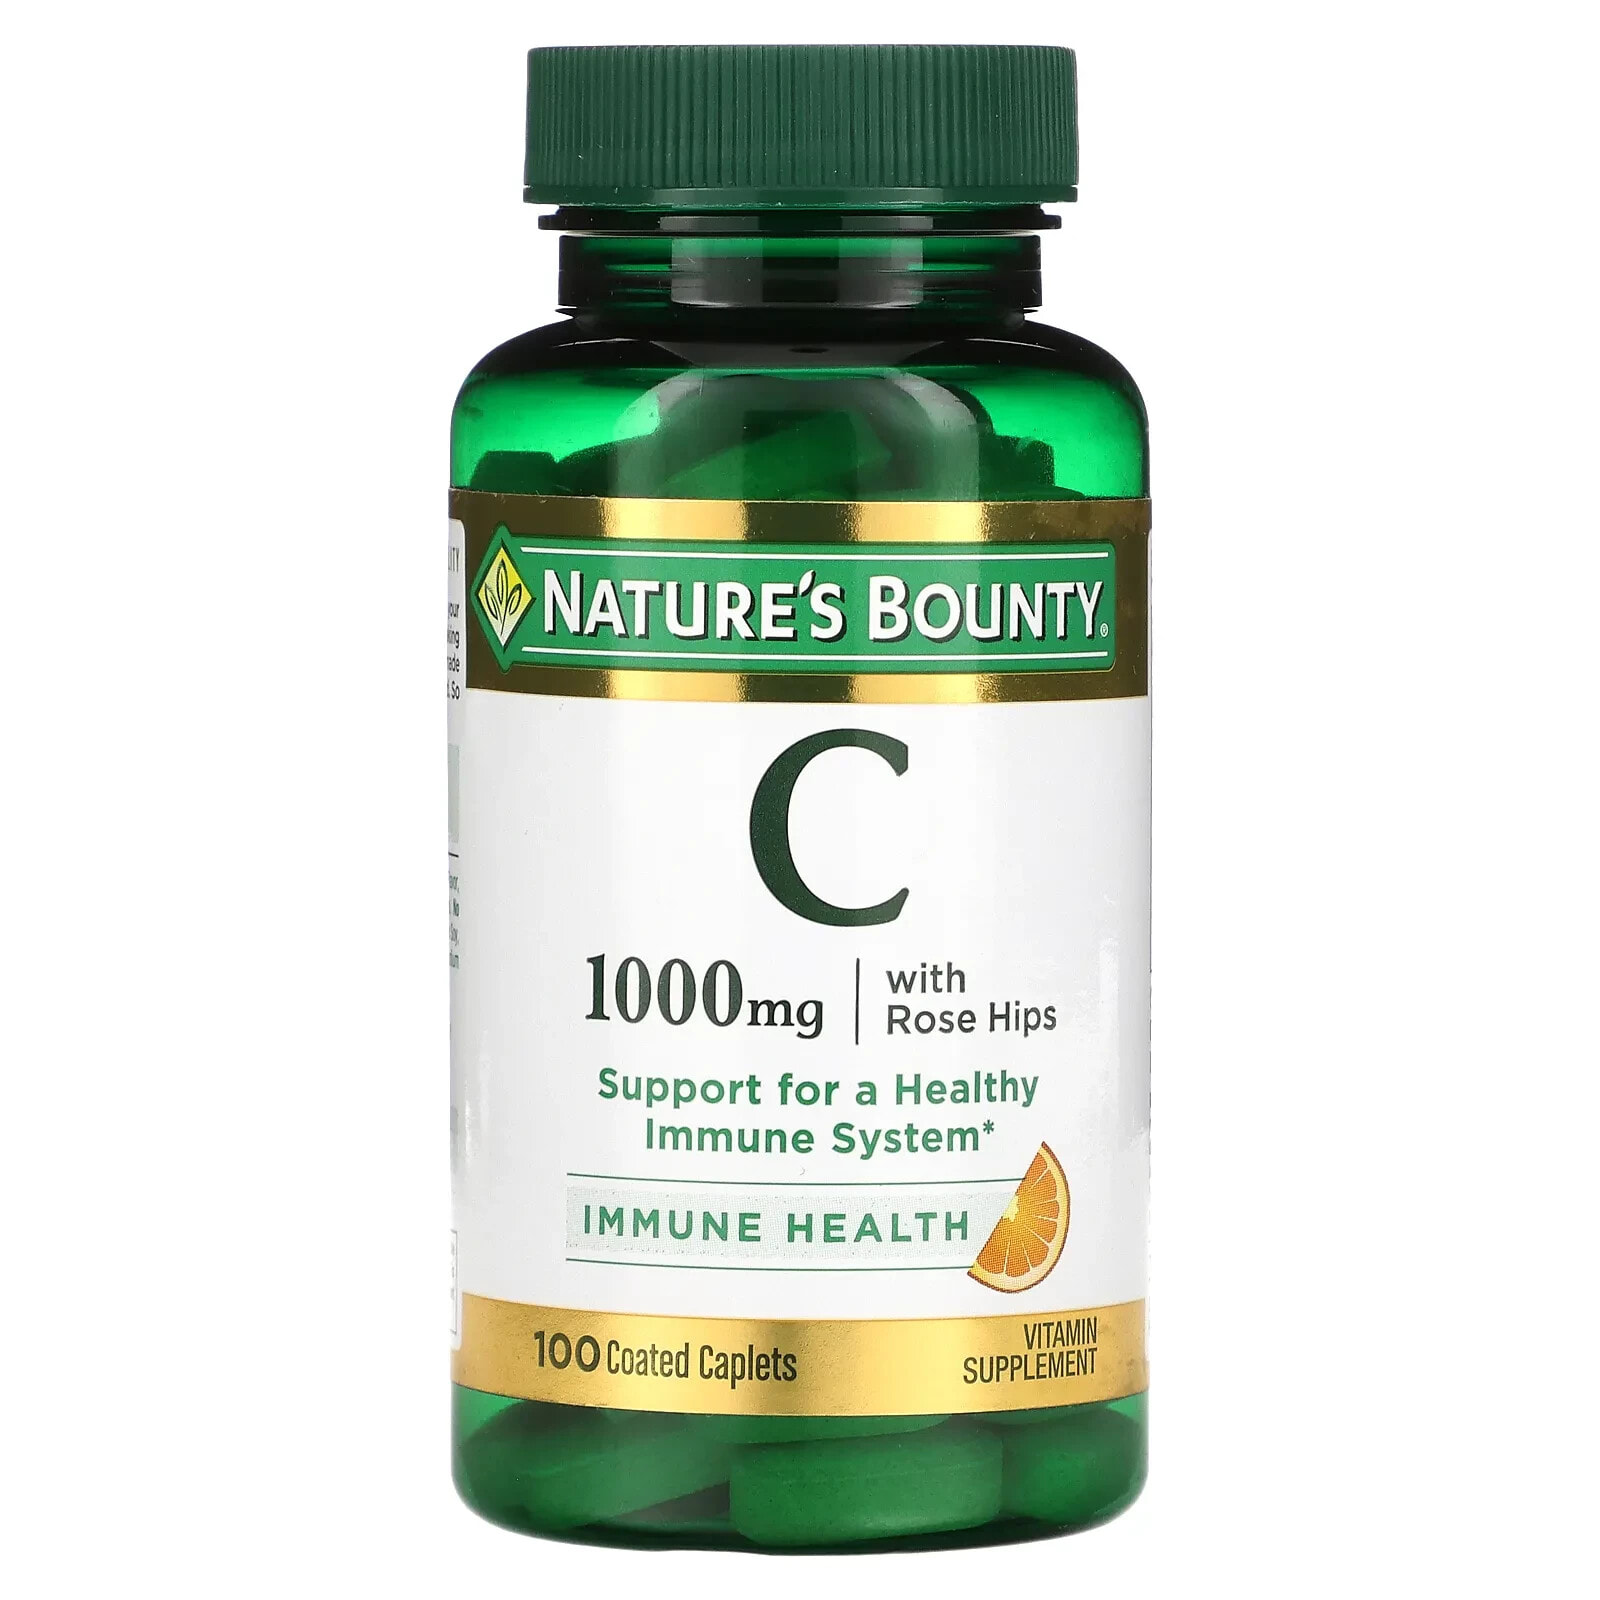 Vitamin C with Rose Hips, 1,000 mg, 100 Coated Caplets